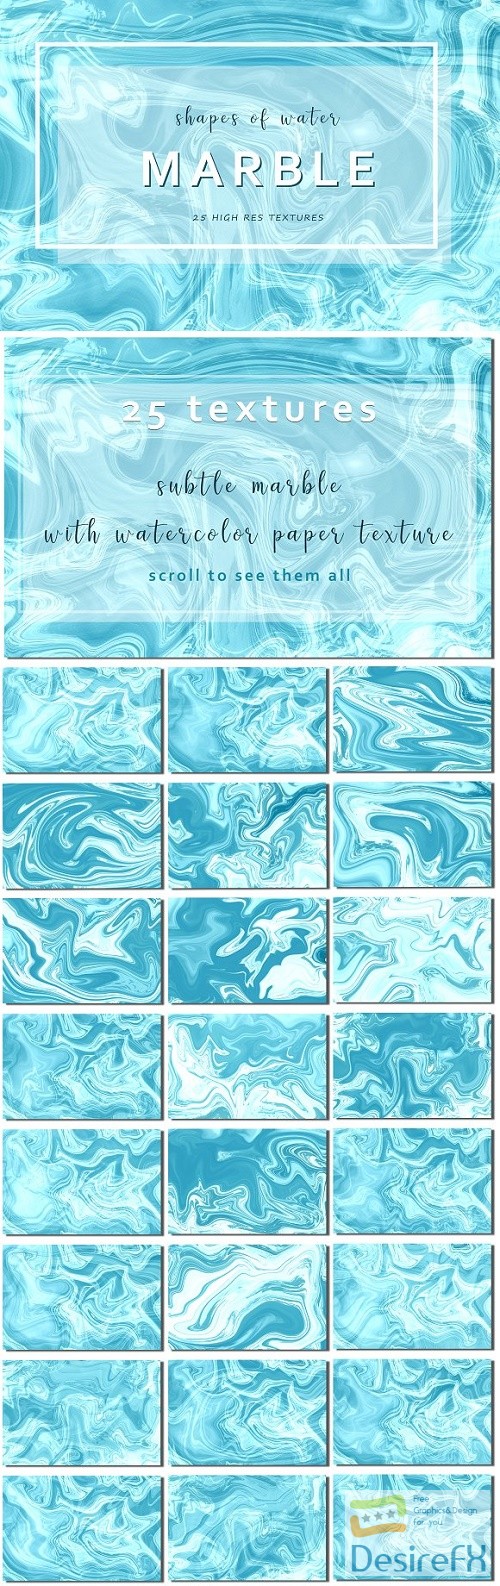 25 Marble Textures "Shapes of Water" 2515237